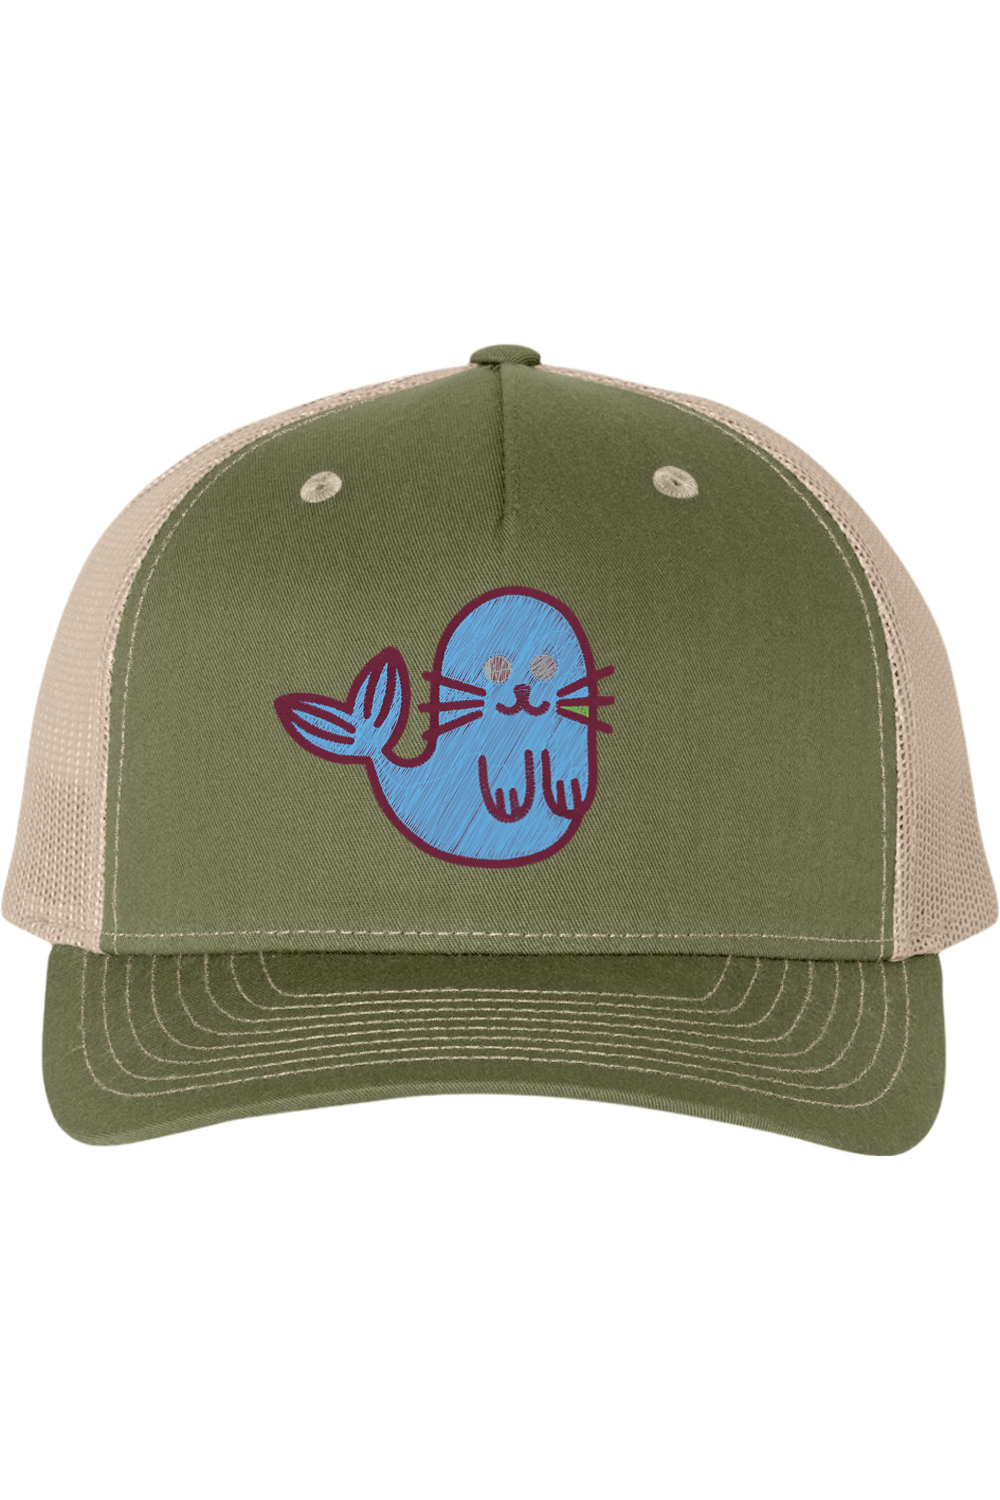 Silly Lion Embroidered Trucker Cap